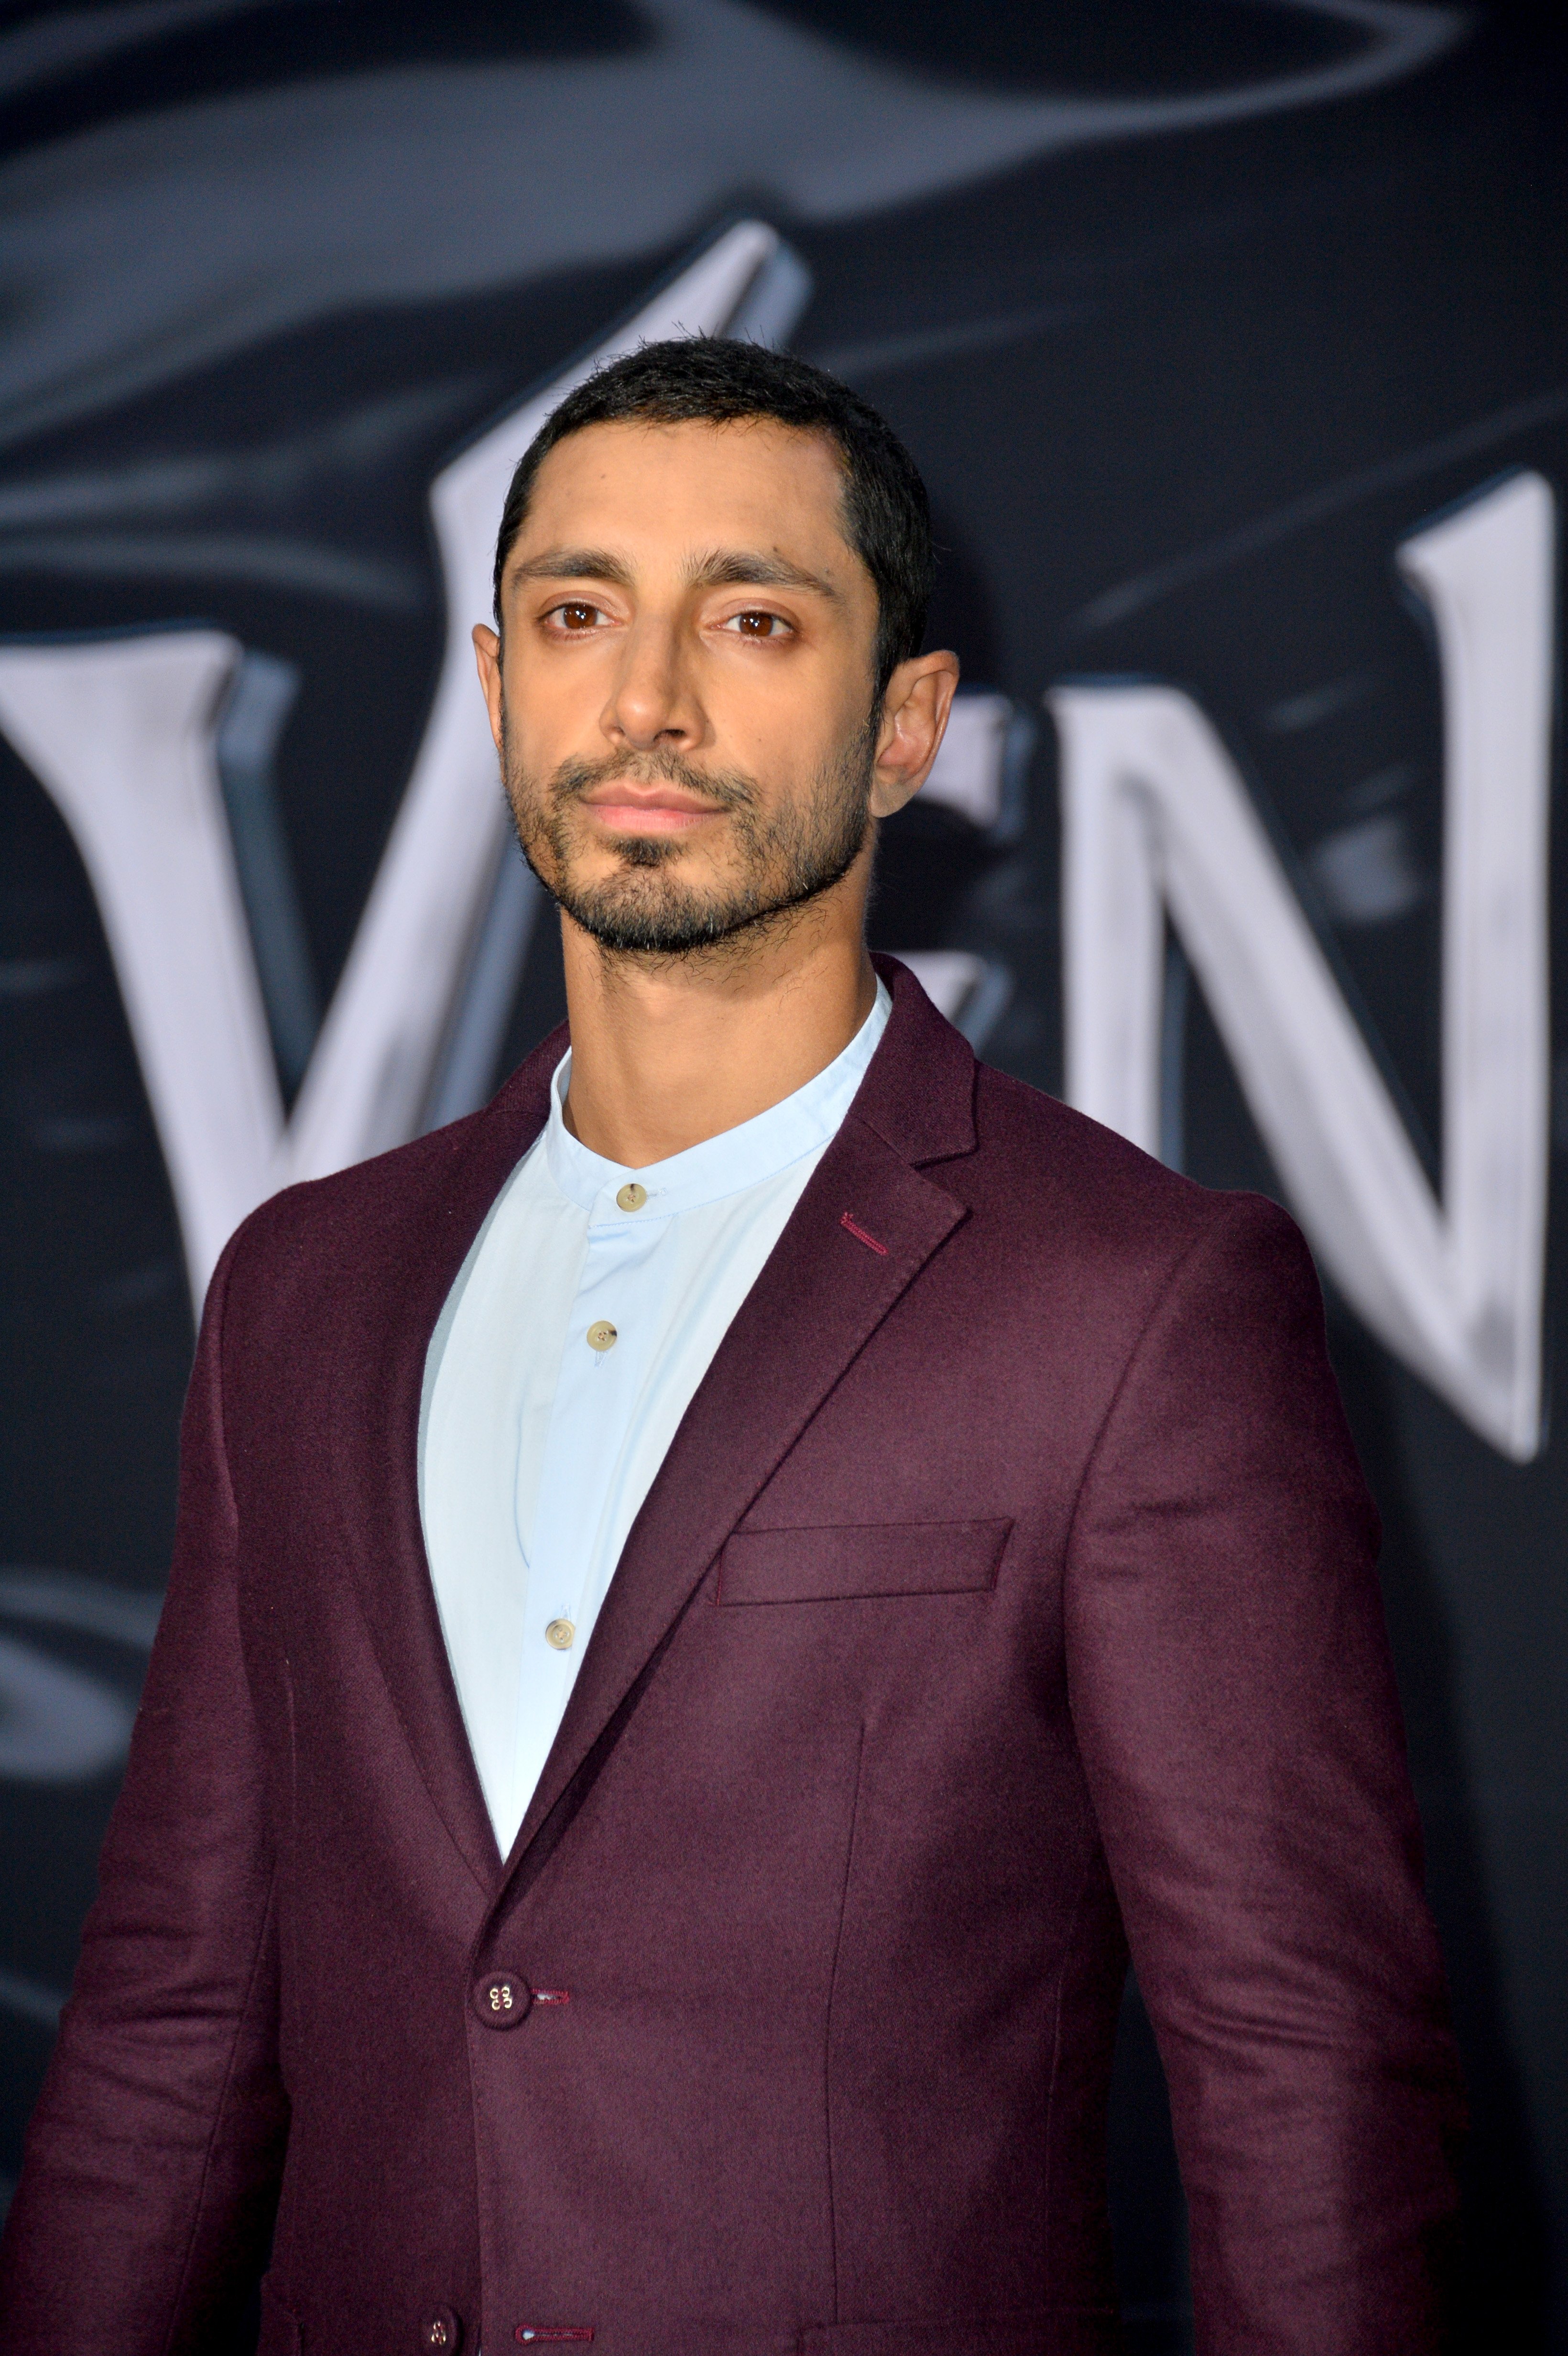 Actor Riz Ahmed at the world premiere of "Venom" at the Regency Village Theater on October 1, 2018 in Los Angeles | Photo: Shutterstock